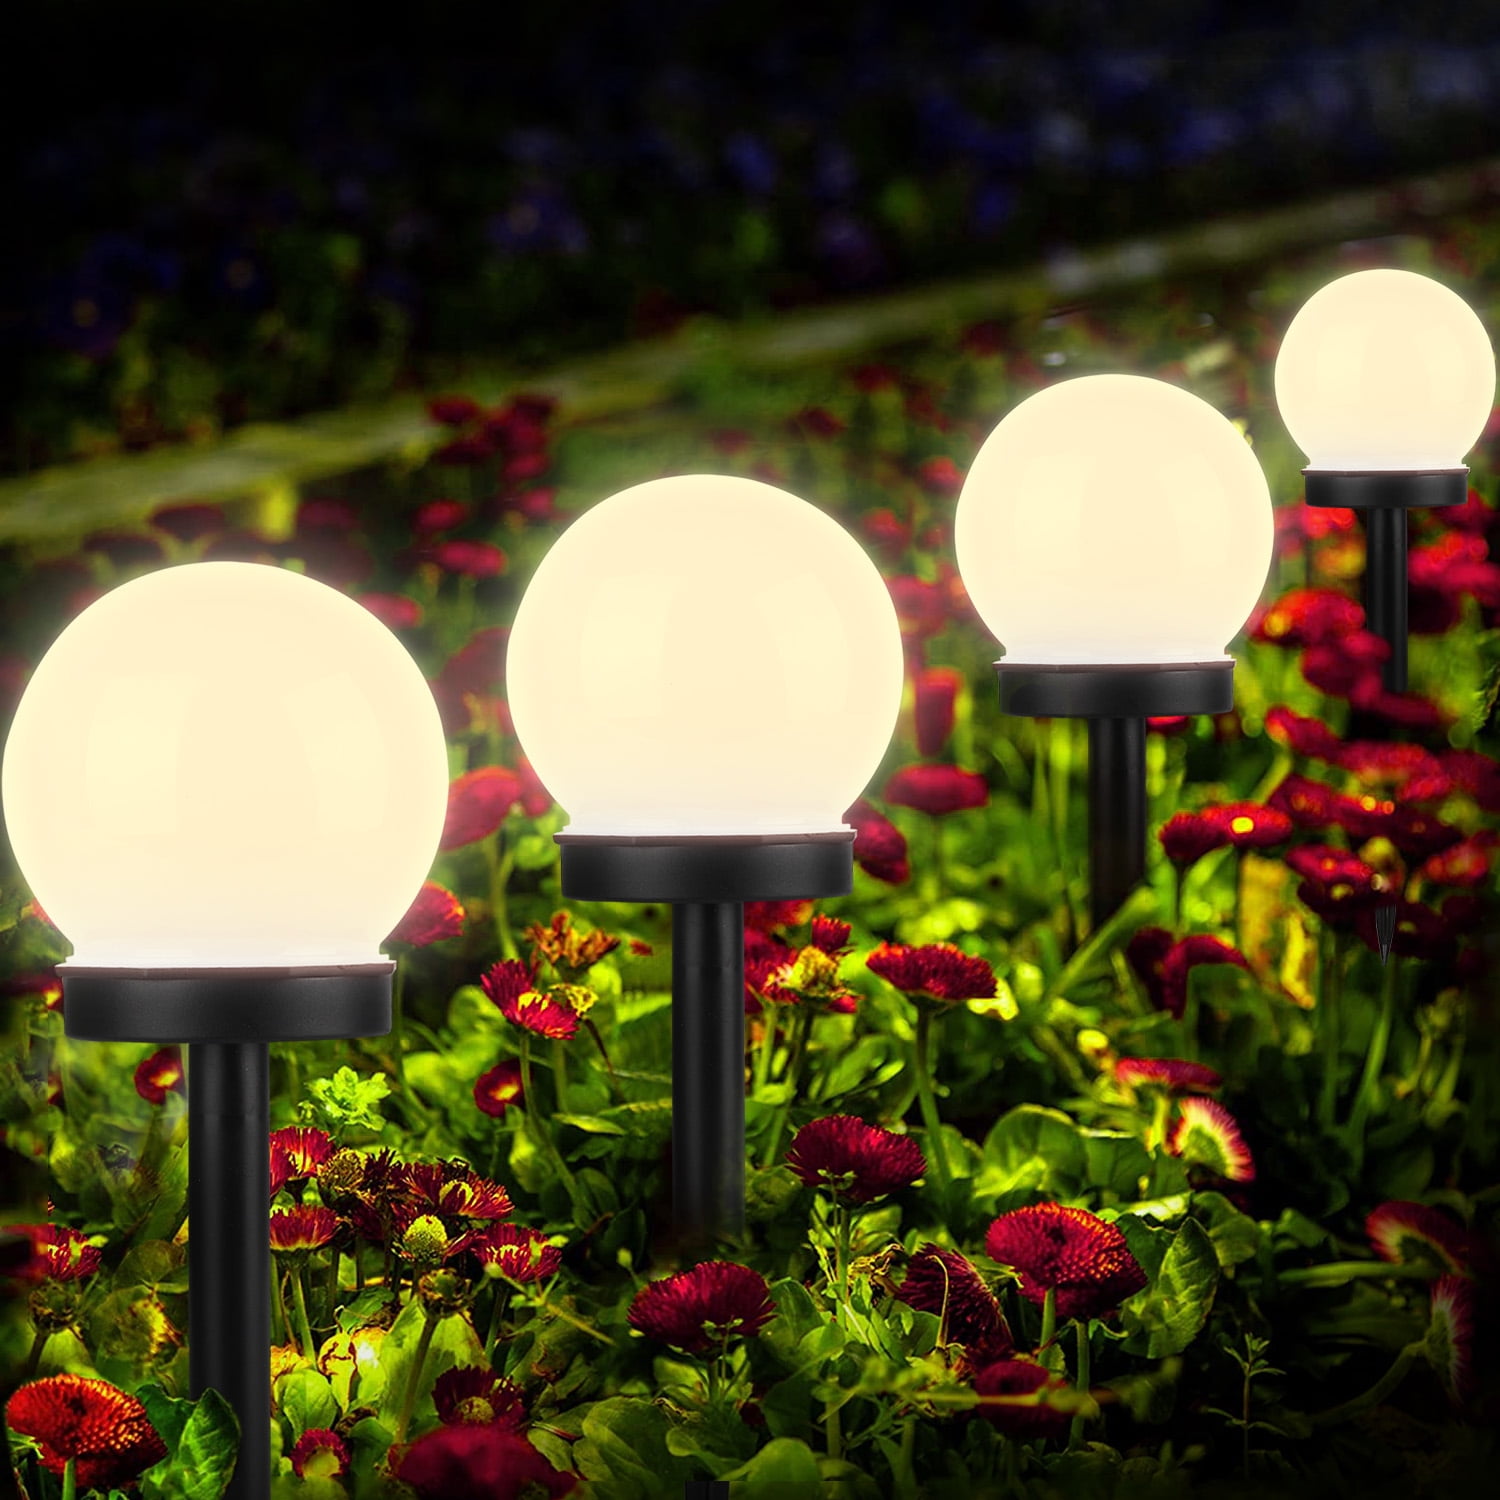 SOLAR STAKE GARDEN LIGHT SPHERE WITH FLOWER CUT OUTS BRAND NEW ****BEAUTIFUL**** 